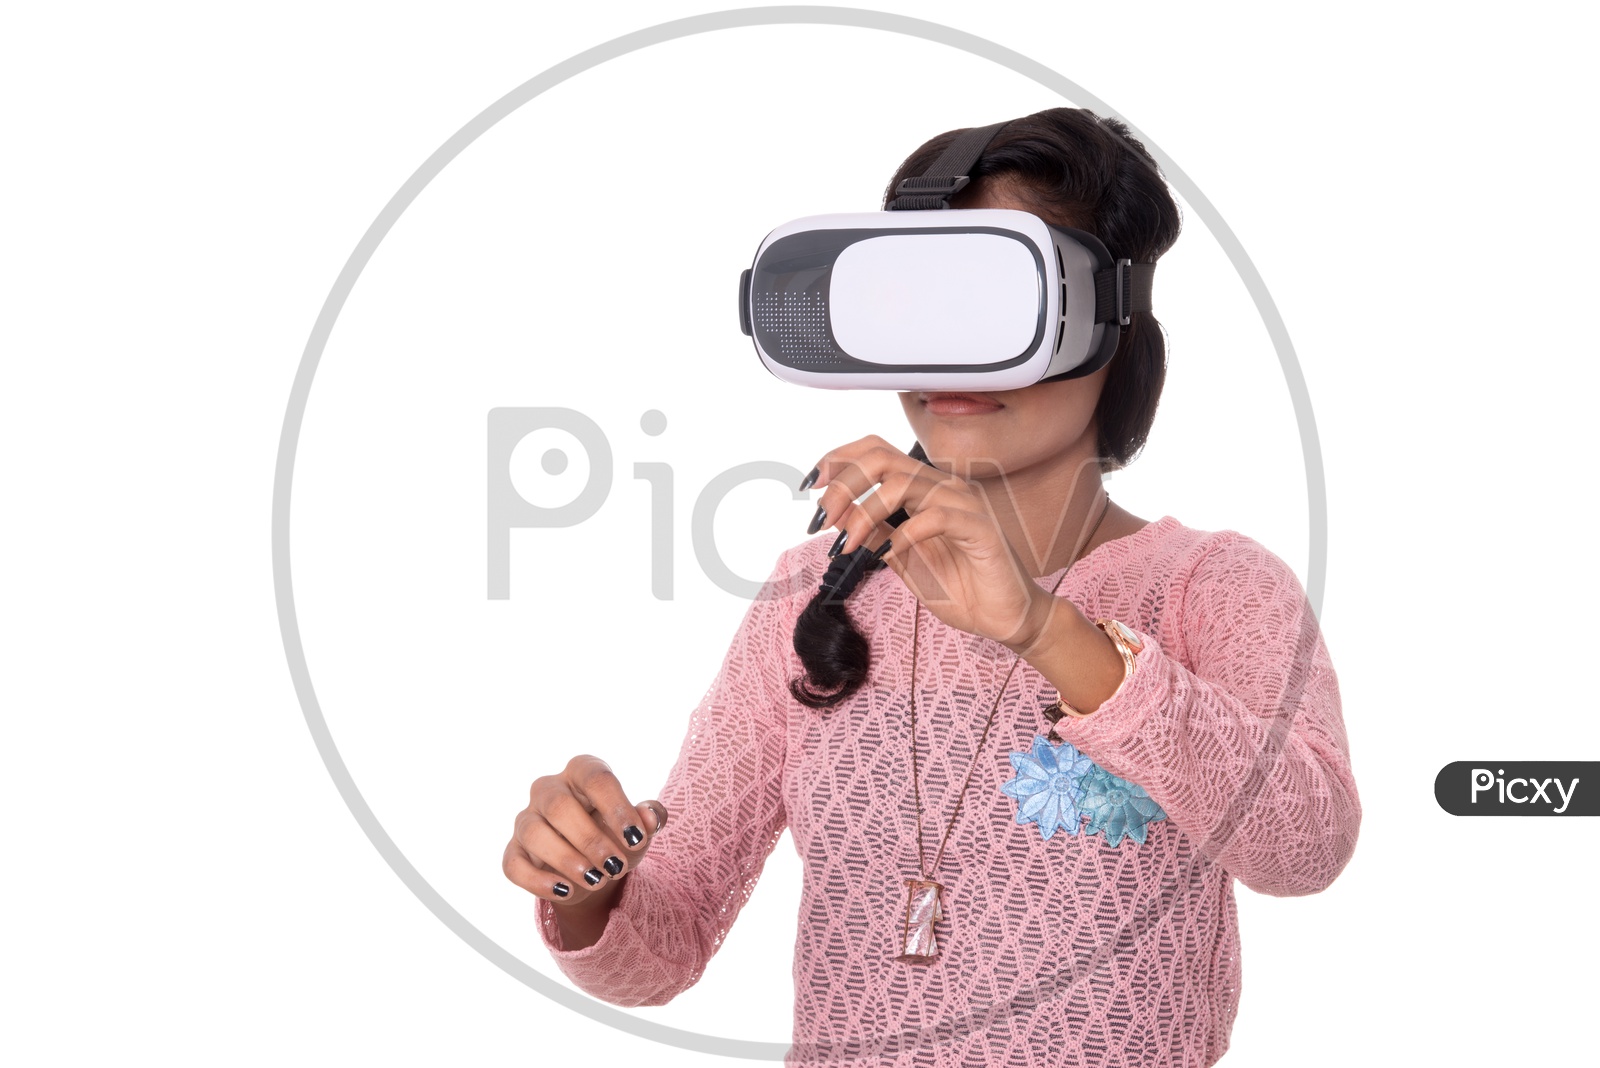 Young Indian Girl Wearing VR Device , Indian Girl Experiencing The Virtual Reality Headset